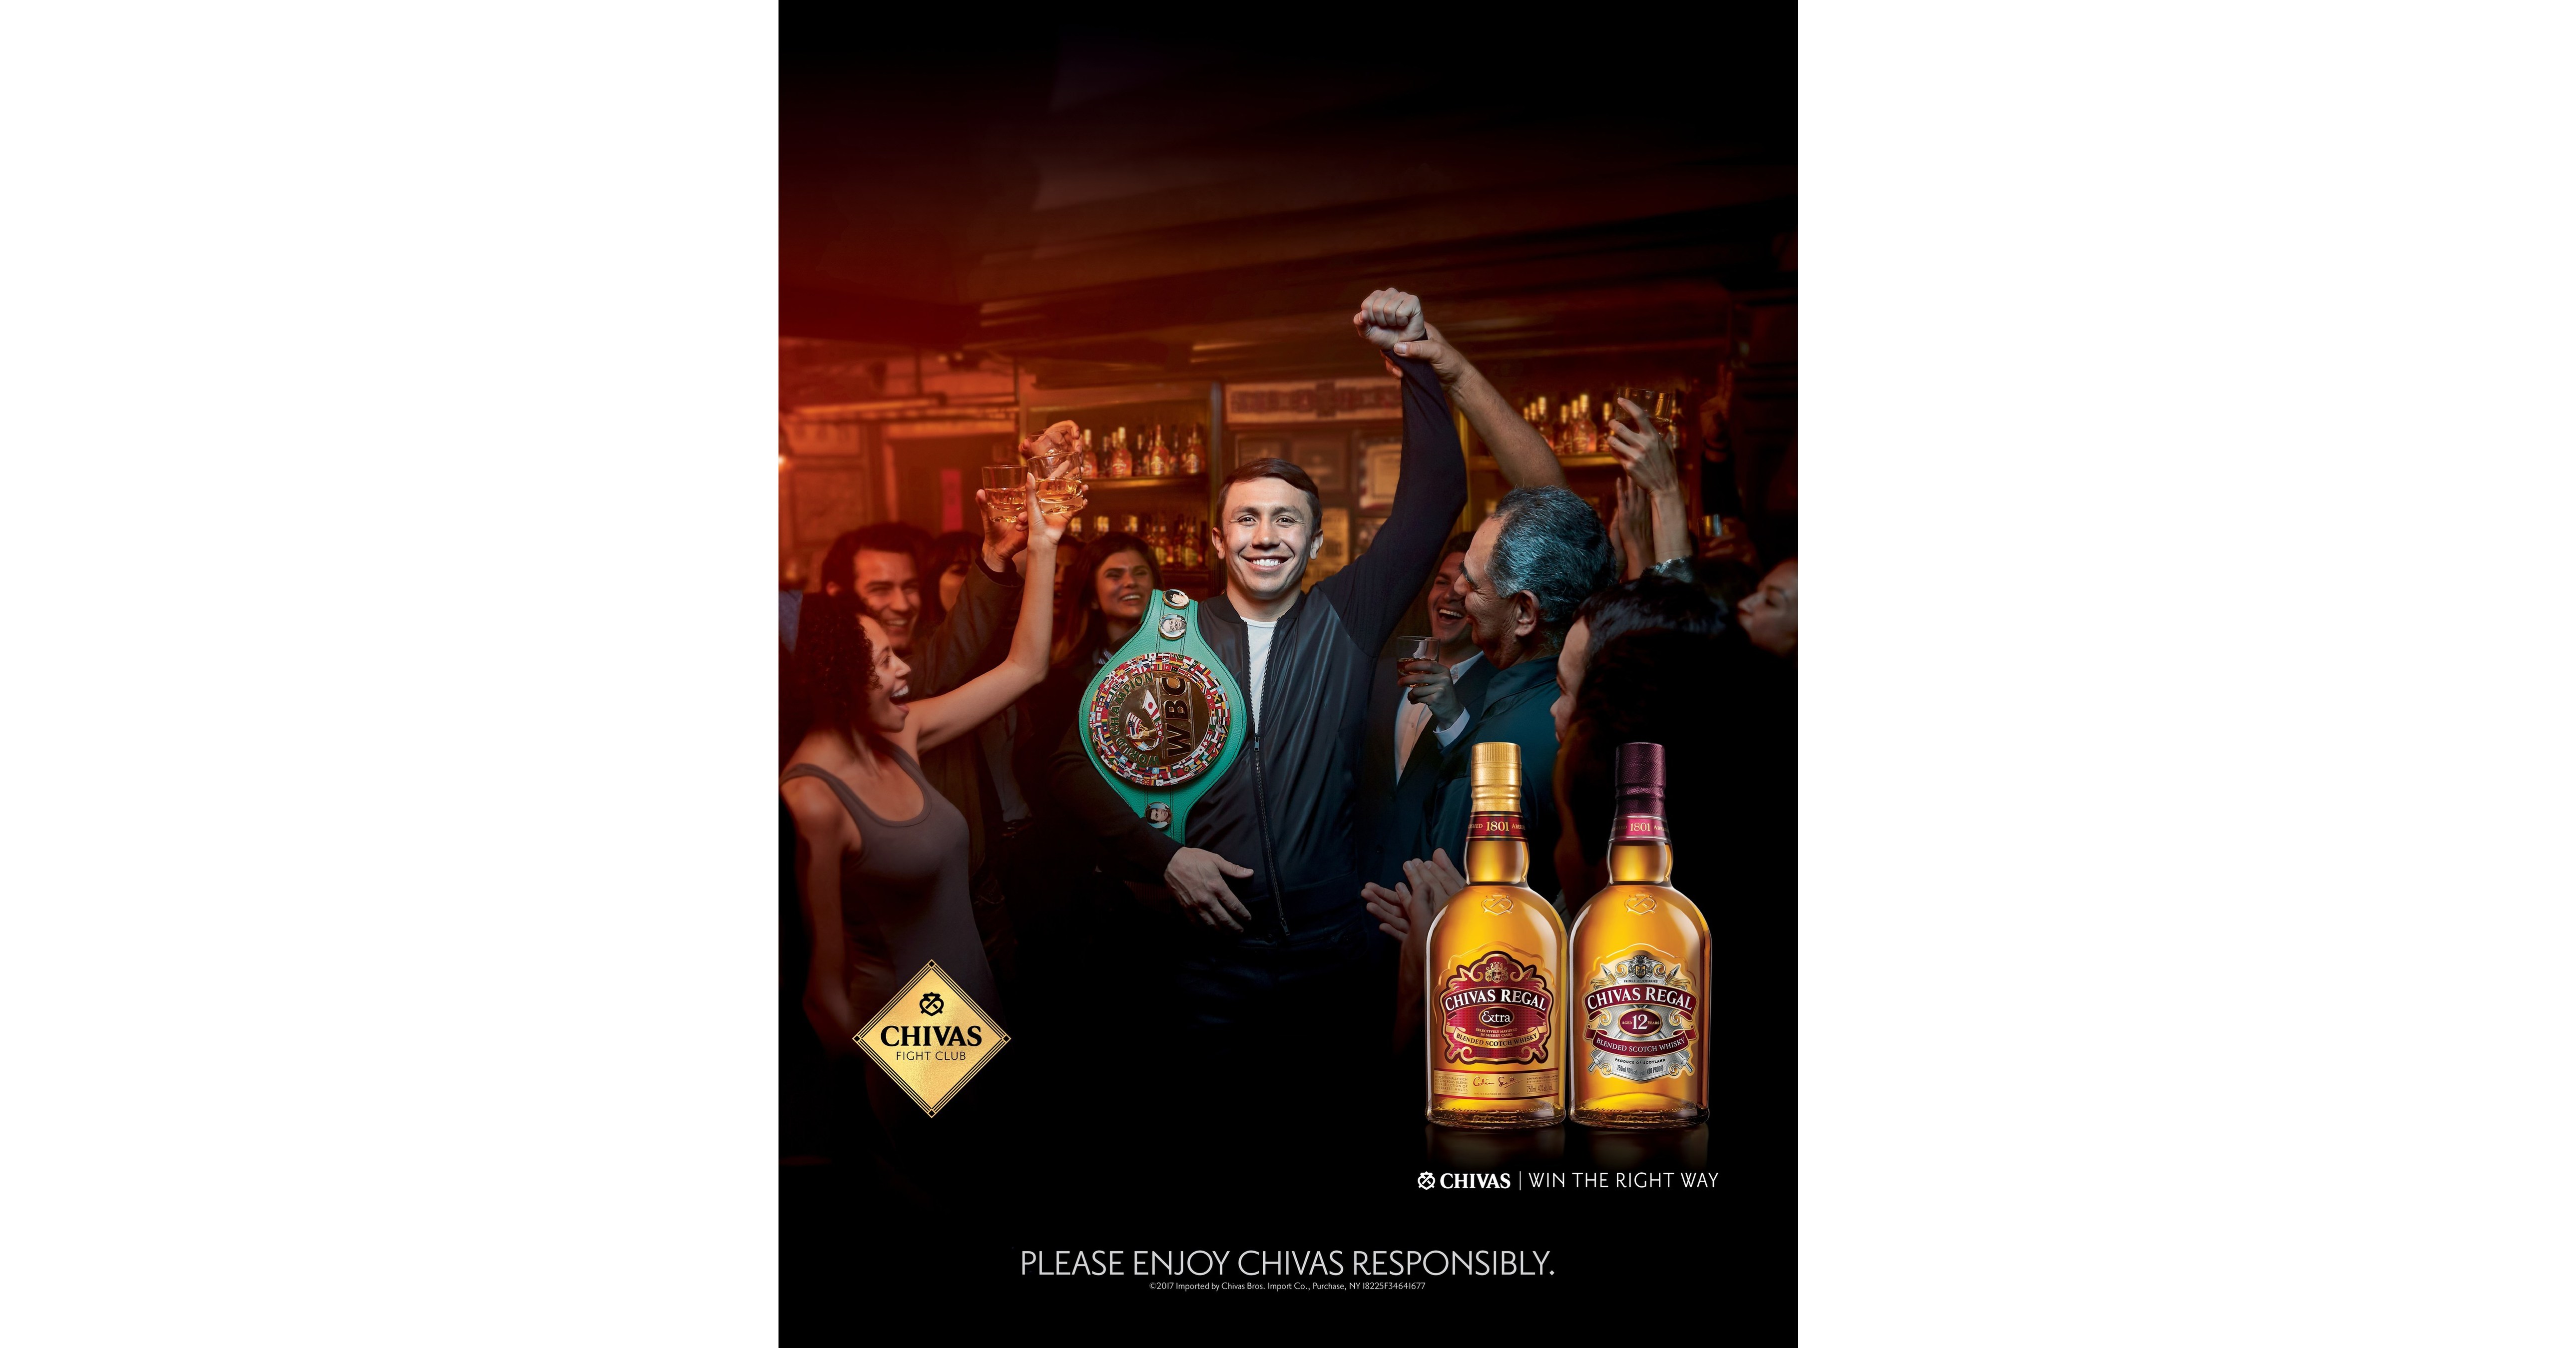 Chivas Regal Partners With Middleweight Champion Gennady GGG Golovkin To  Launch The Chivas® Fight Club